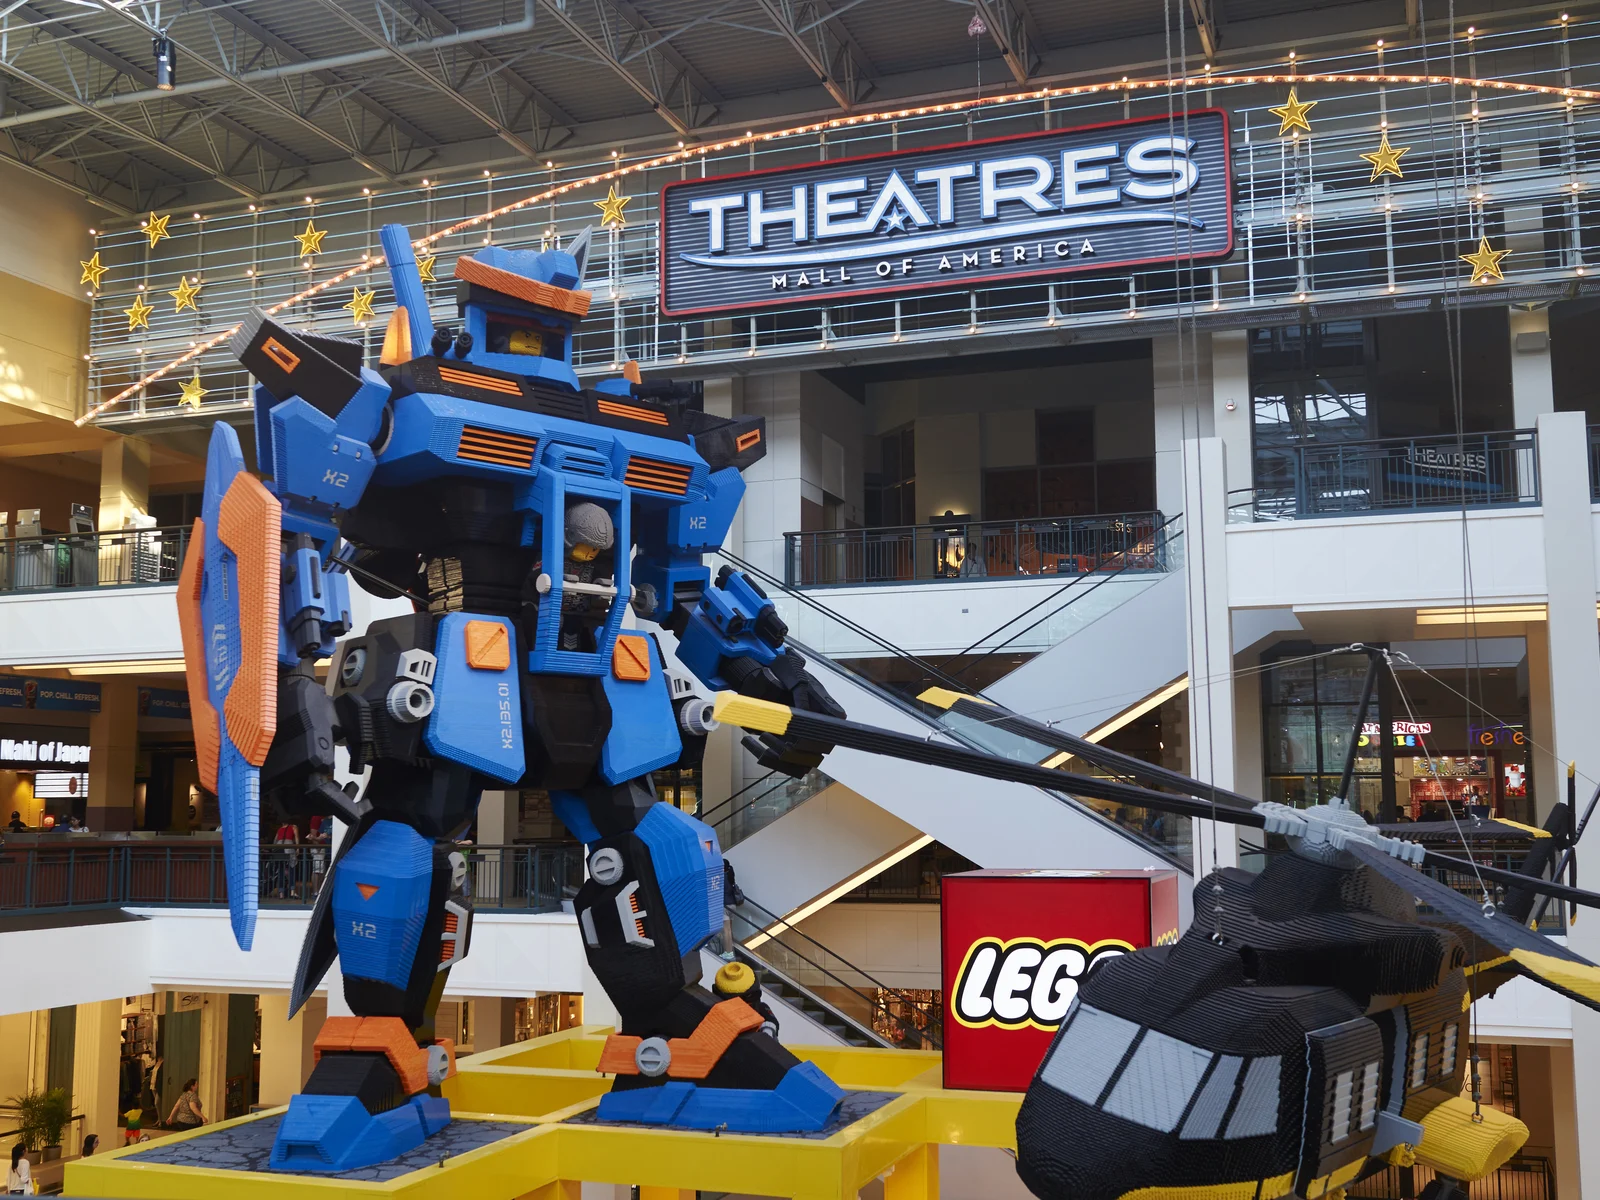 A giant lego robot and helicopter displayed at the LEGO Store in Mall of America, one of the best toy stores in America